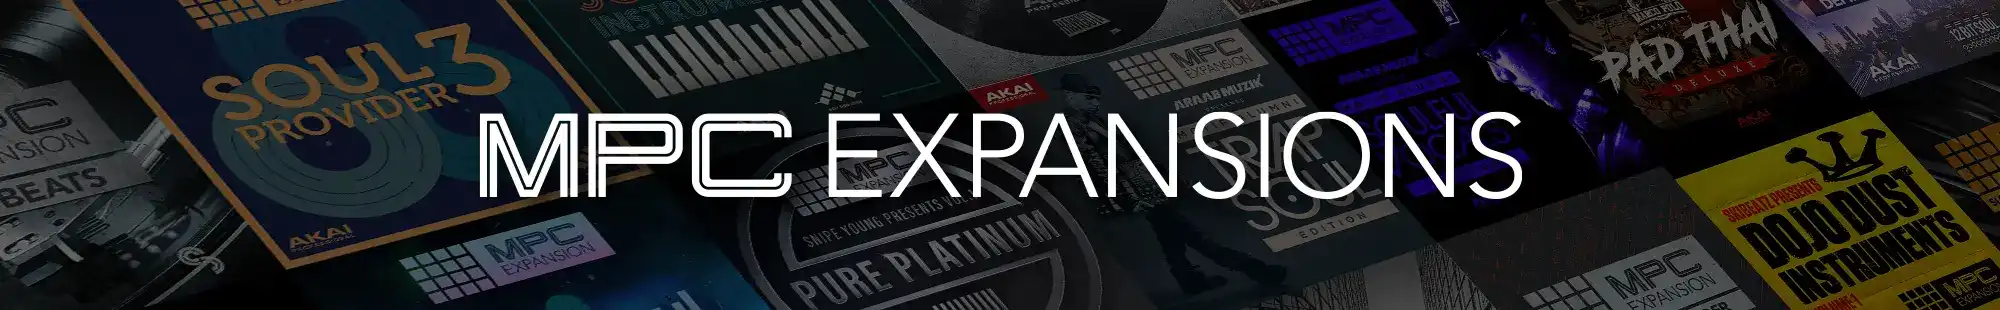 MPC Expansions Banner